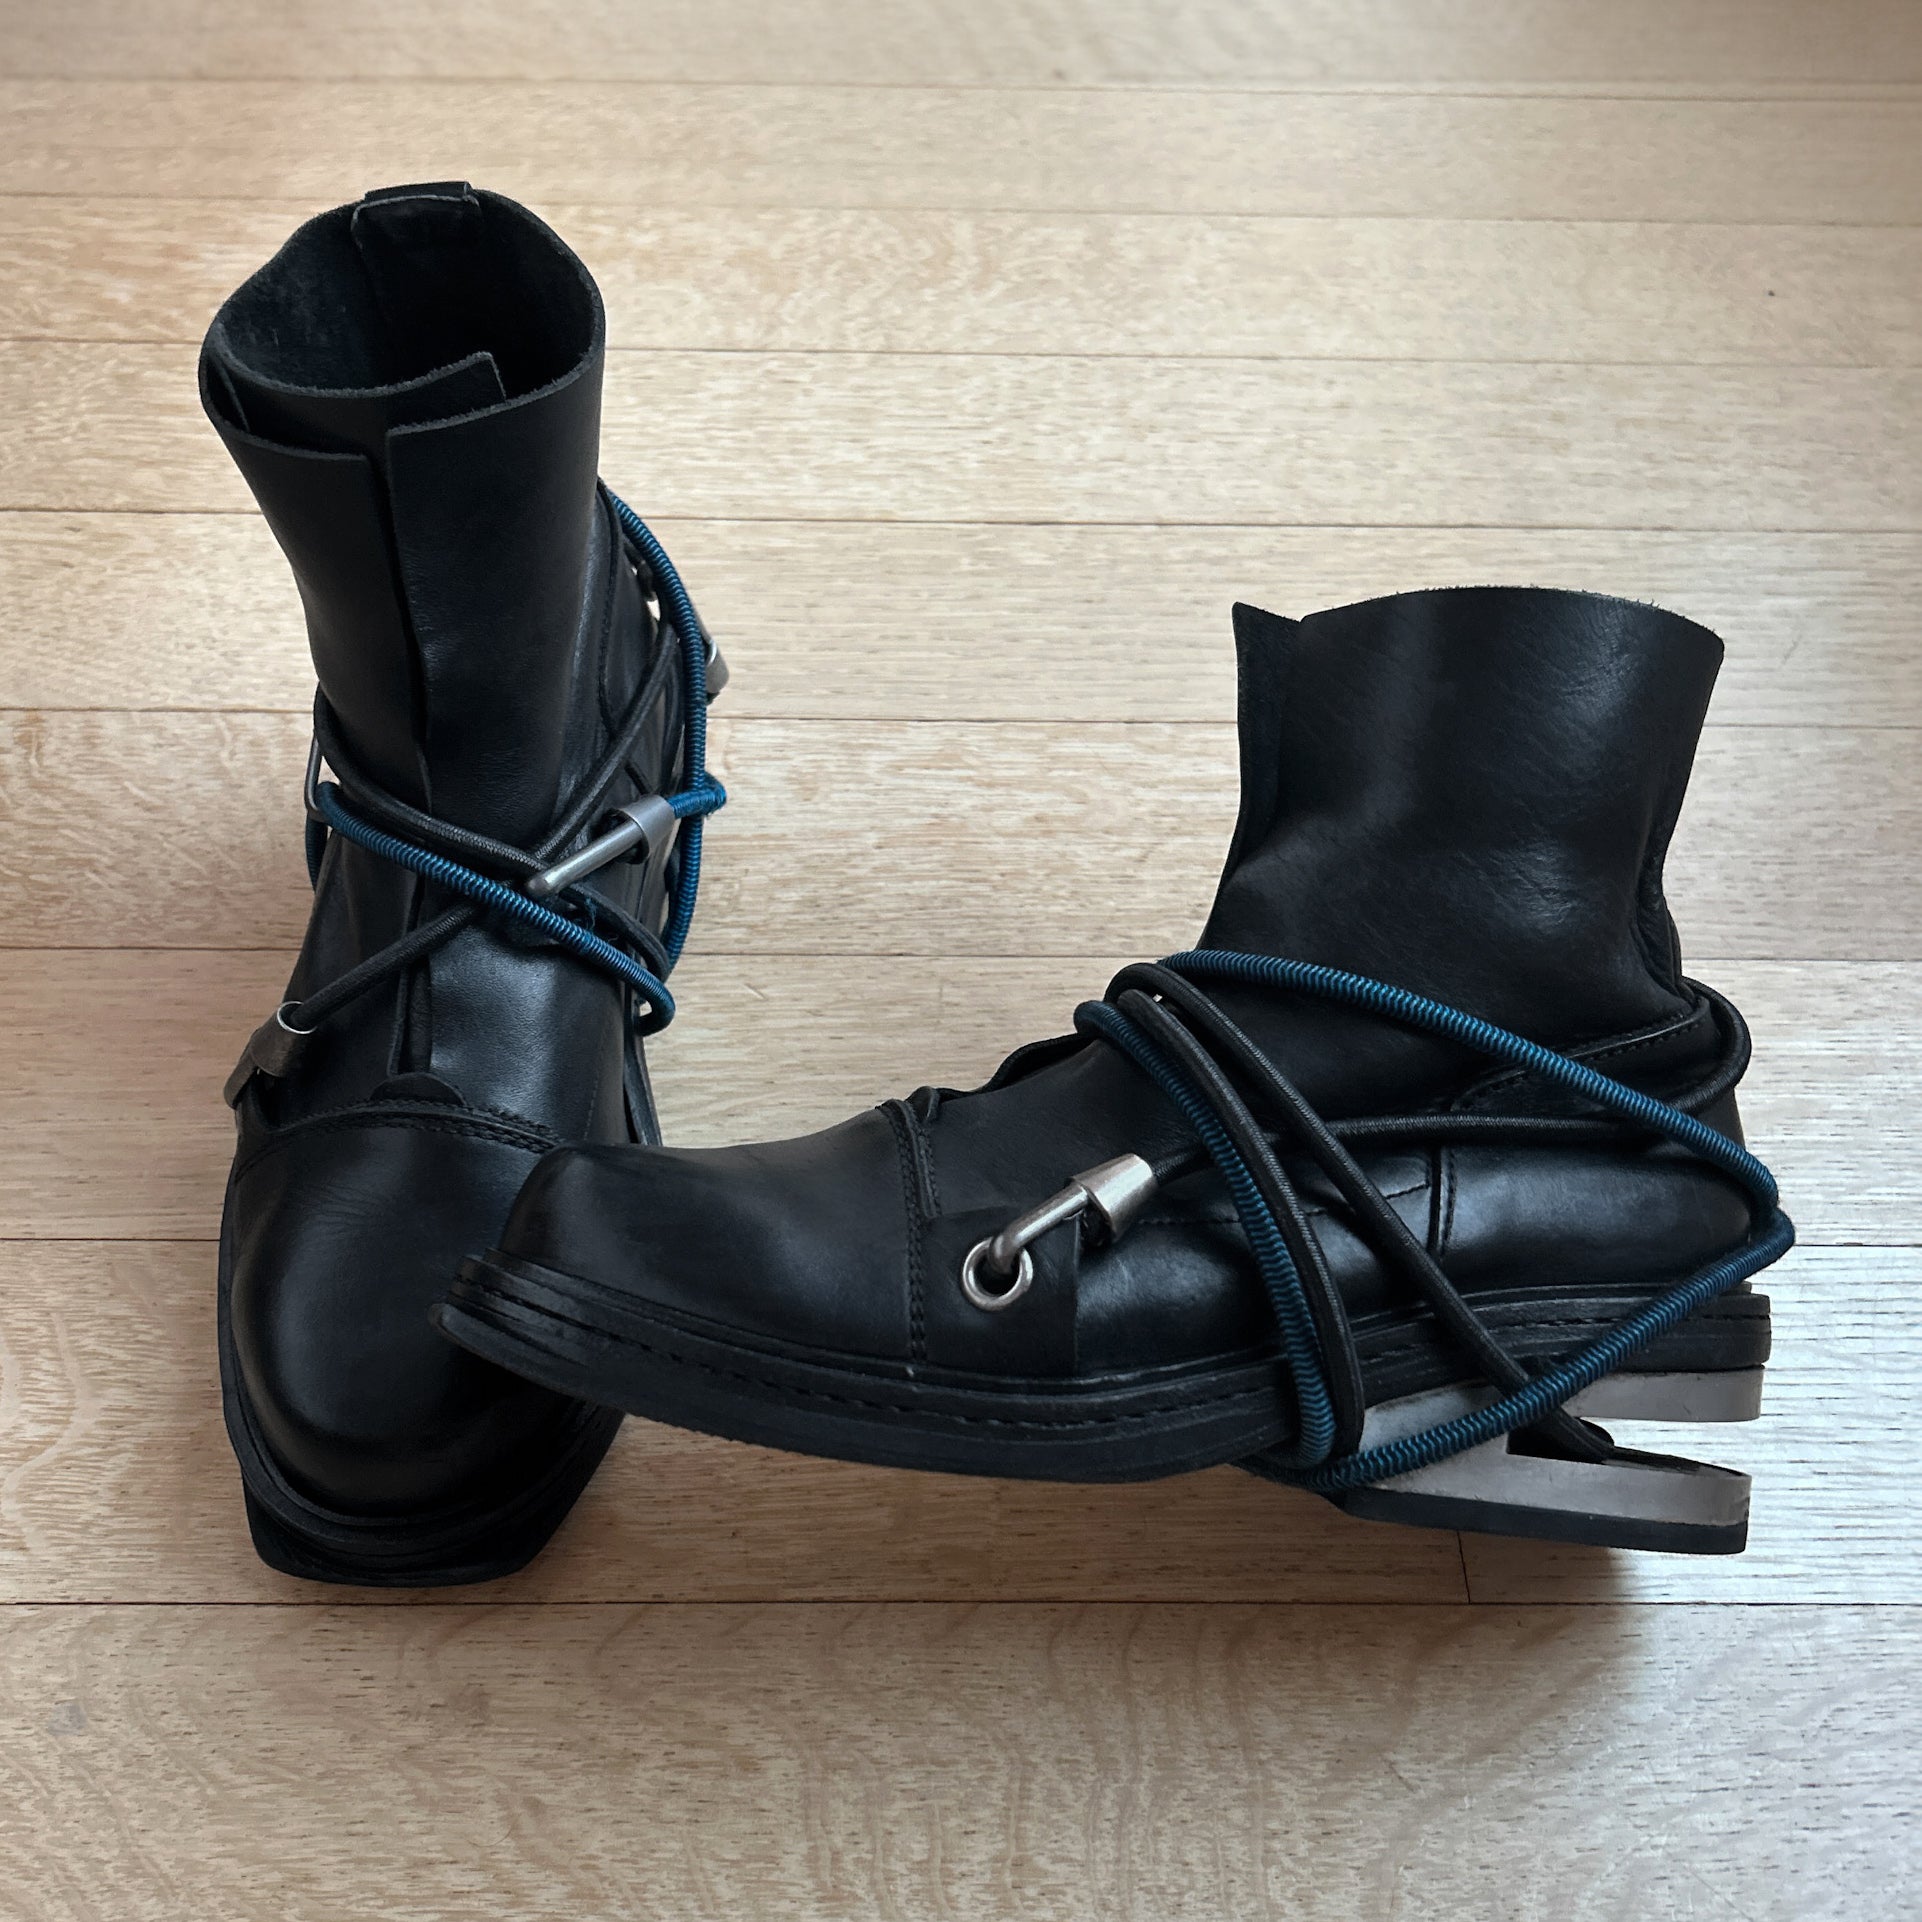 AW96 Dirk Bikkembergs Bungee Cord Mountaineering Boots With